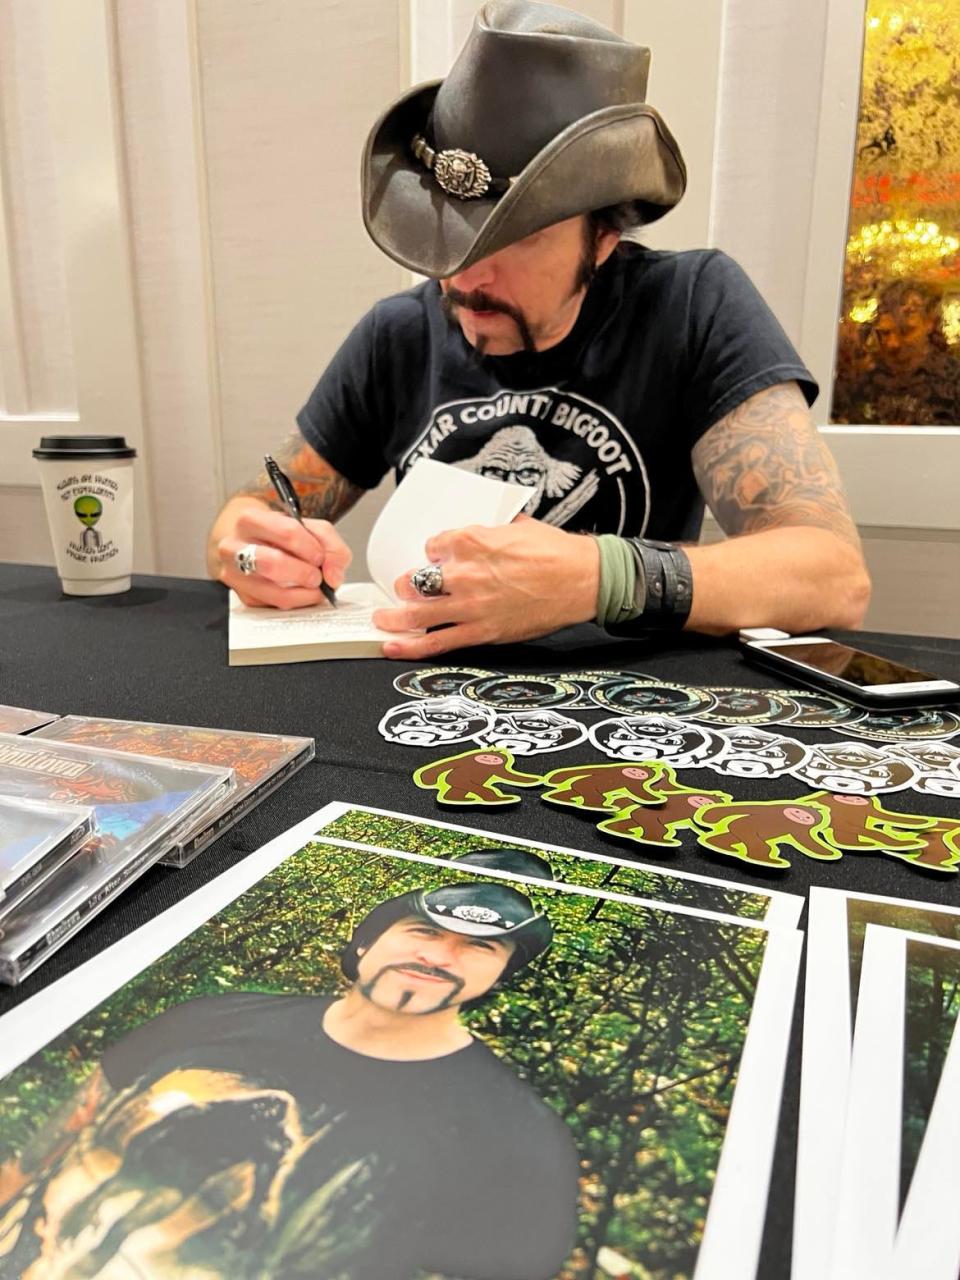 Author Lyle Blackburn signs a book at last year's inaugural Monster Fest at the DoubleTree by Hilton hotel in downtown Canton. The event returns on June 29.